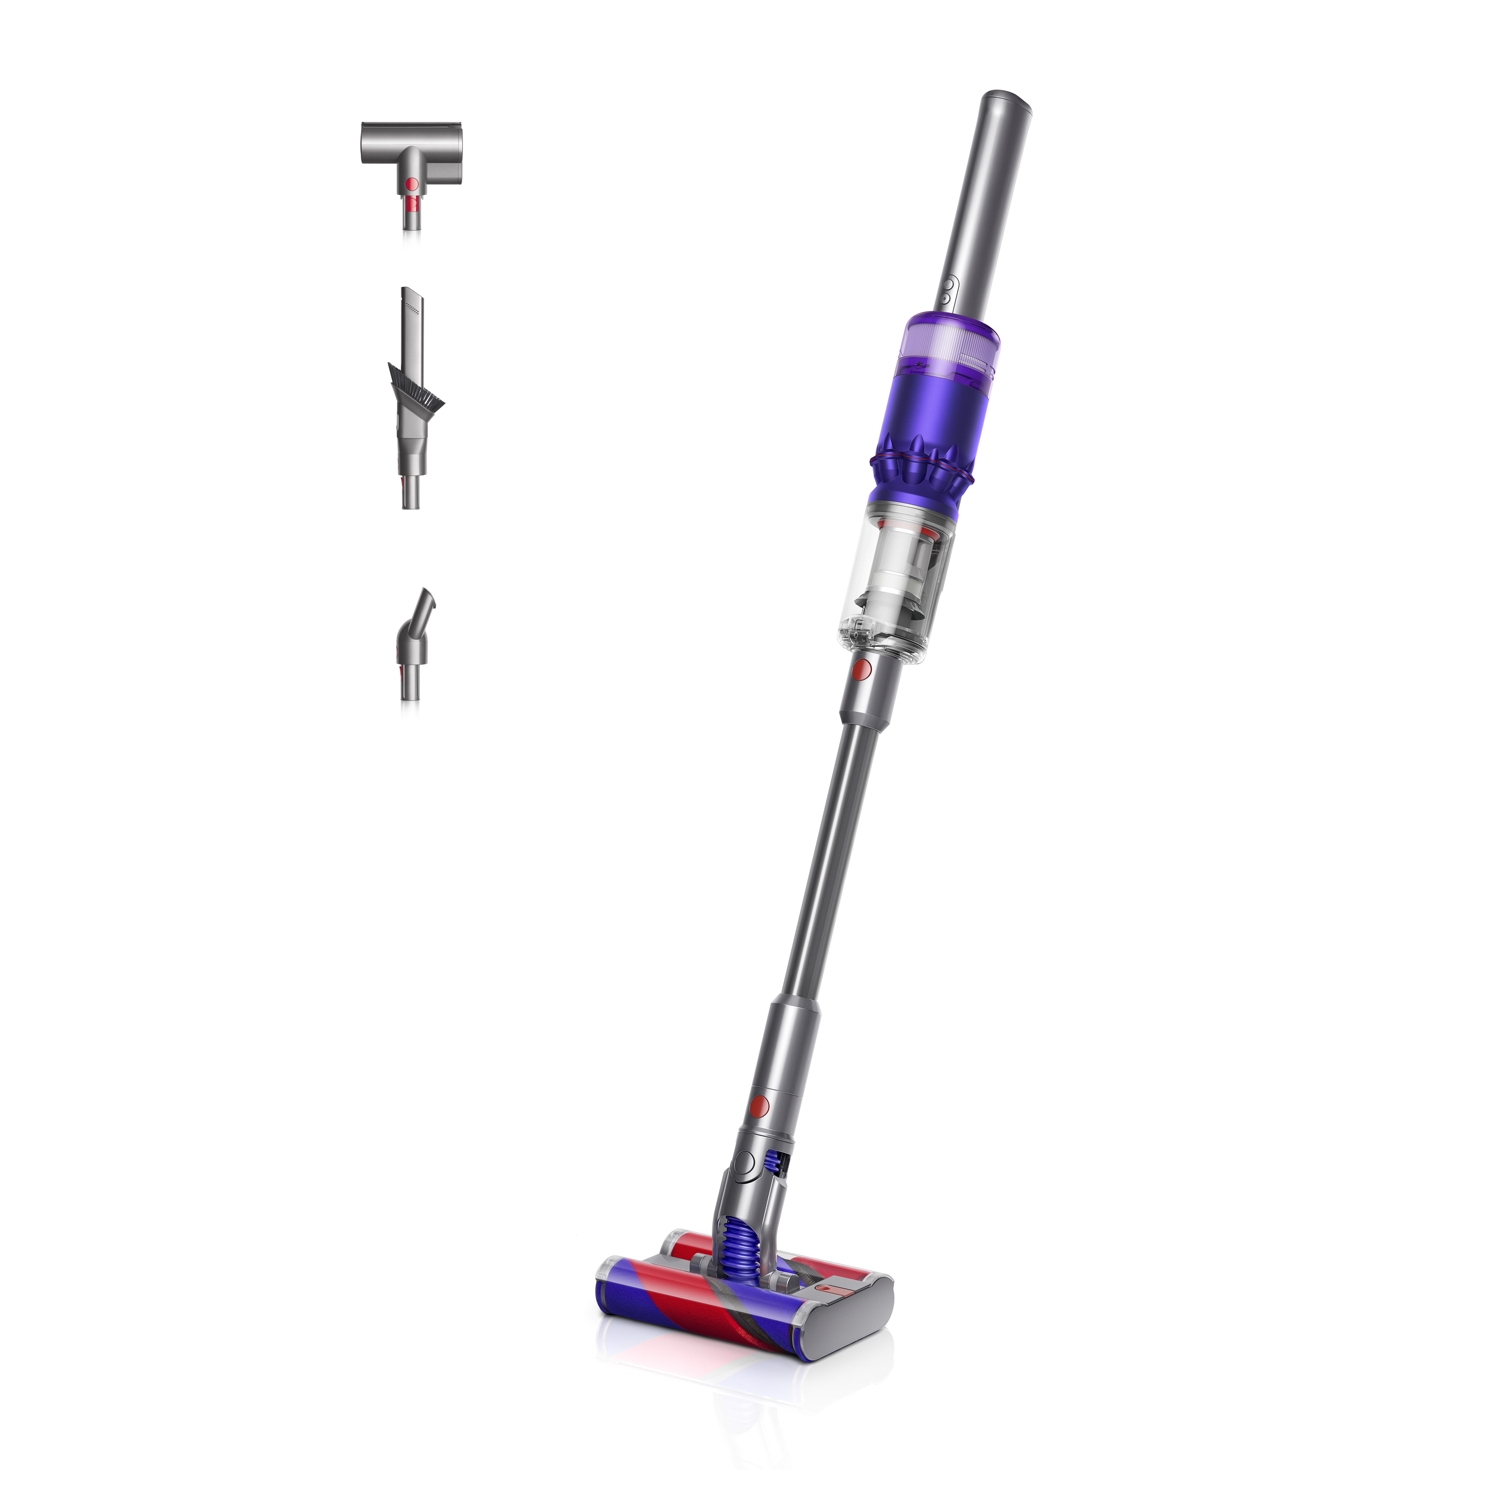 Dyson OMNIGLIDE Cordless Stick Vaccum Cleaner - 20 Minute Run Time - 0